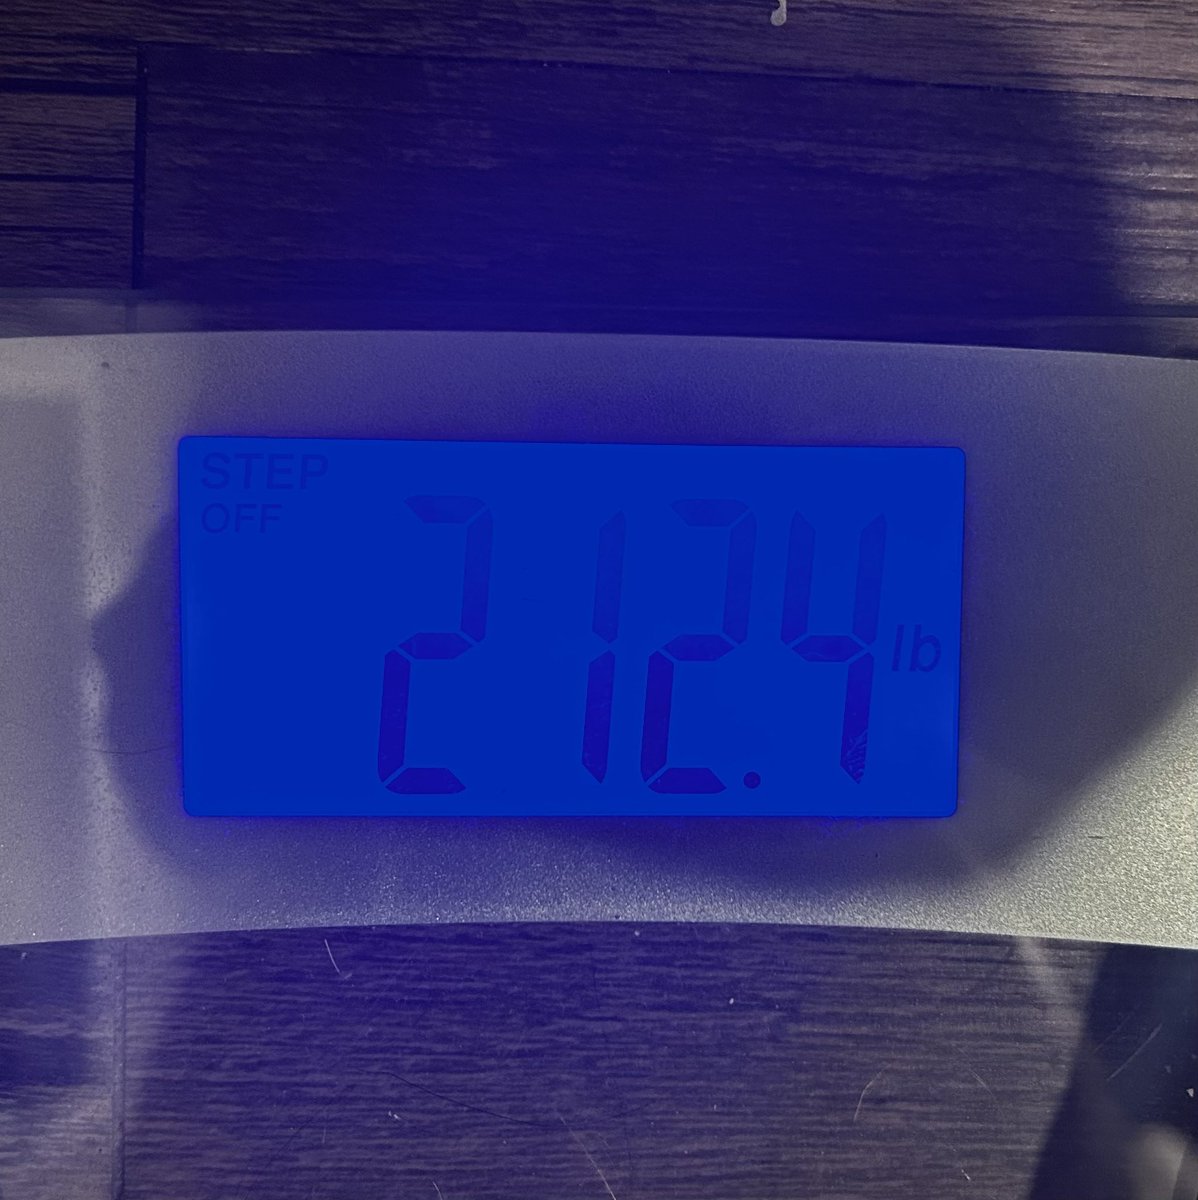 Another #weighinwednesday, another pound and a half gone! I’ve actually started working out again, I’ve been slacking on that since I started my new job in March. I want to lose fat and build muscle. Next wedding is in 12 weeks. Let’s do this.